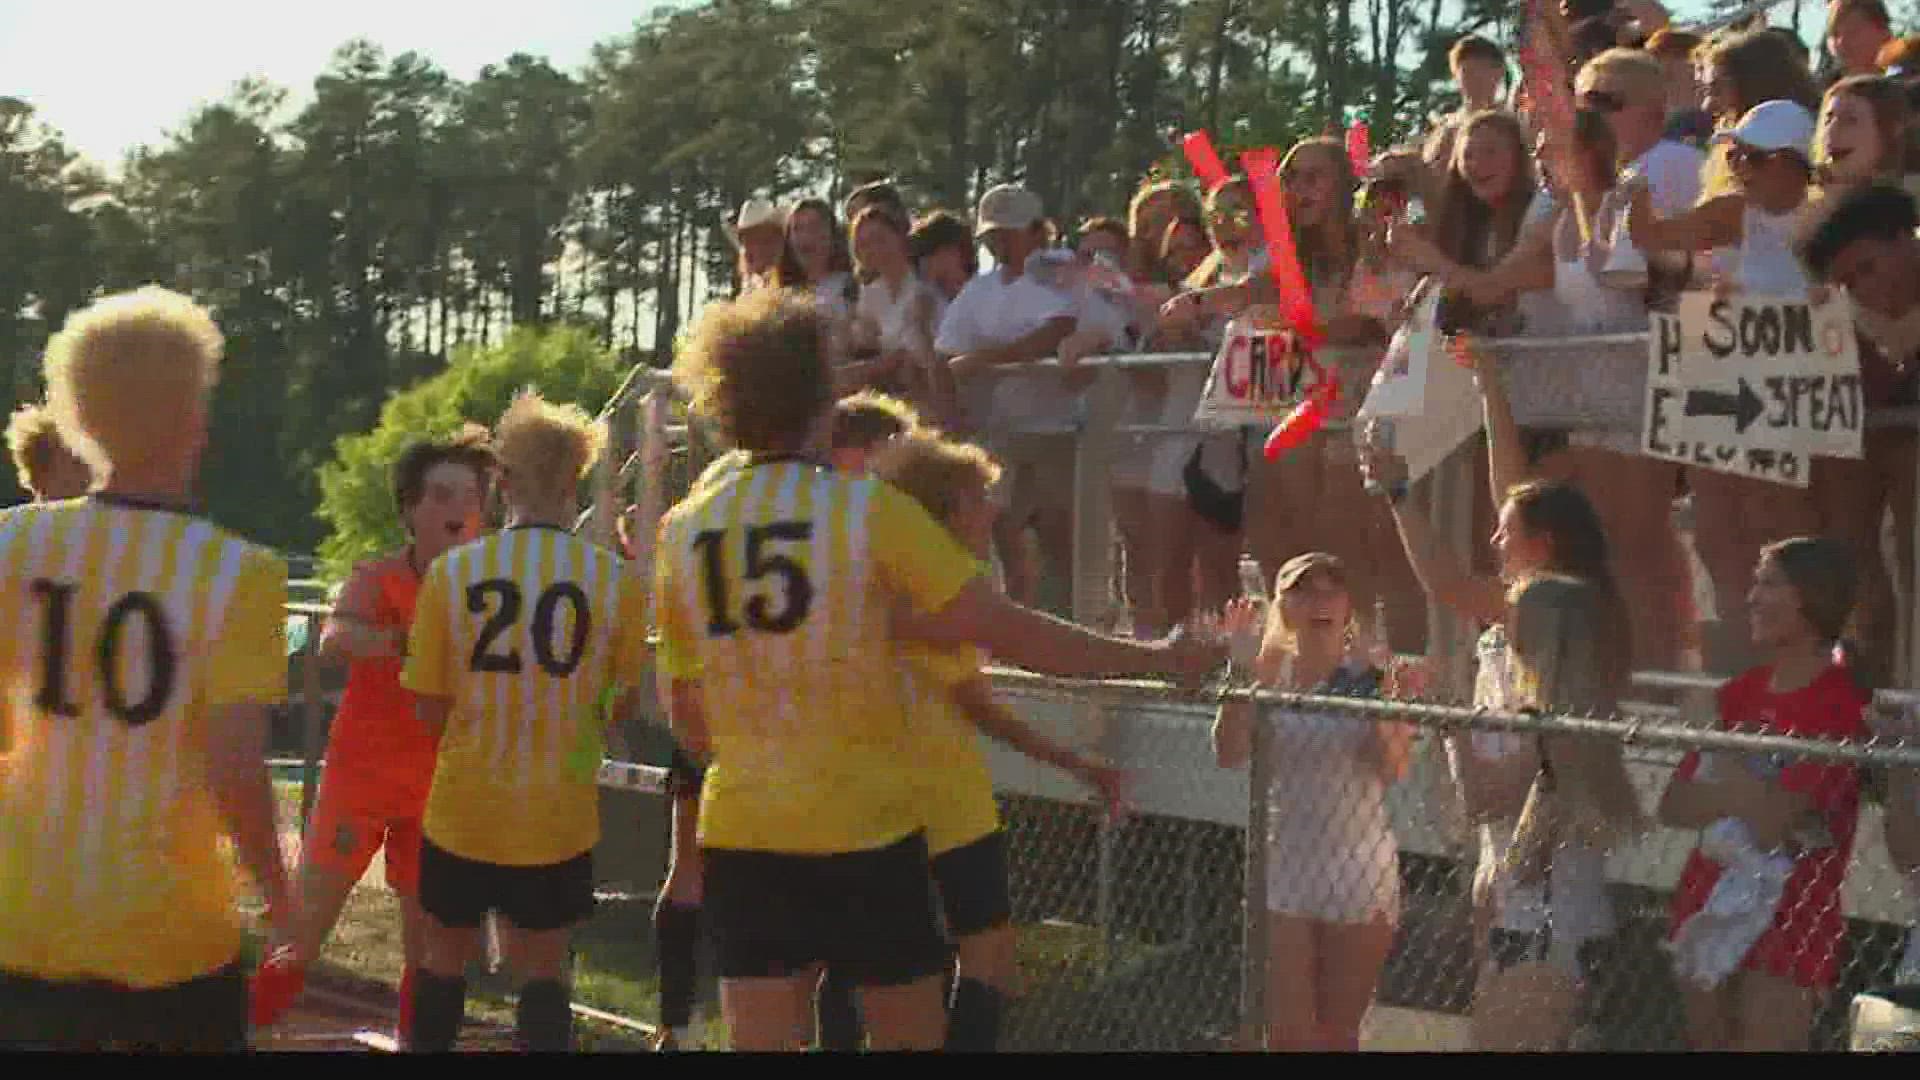 Highlights and reaction from Cardinal Newman's 3-0 win over Hammond in the Class 3A SCISA state championship.